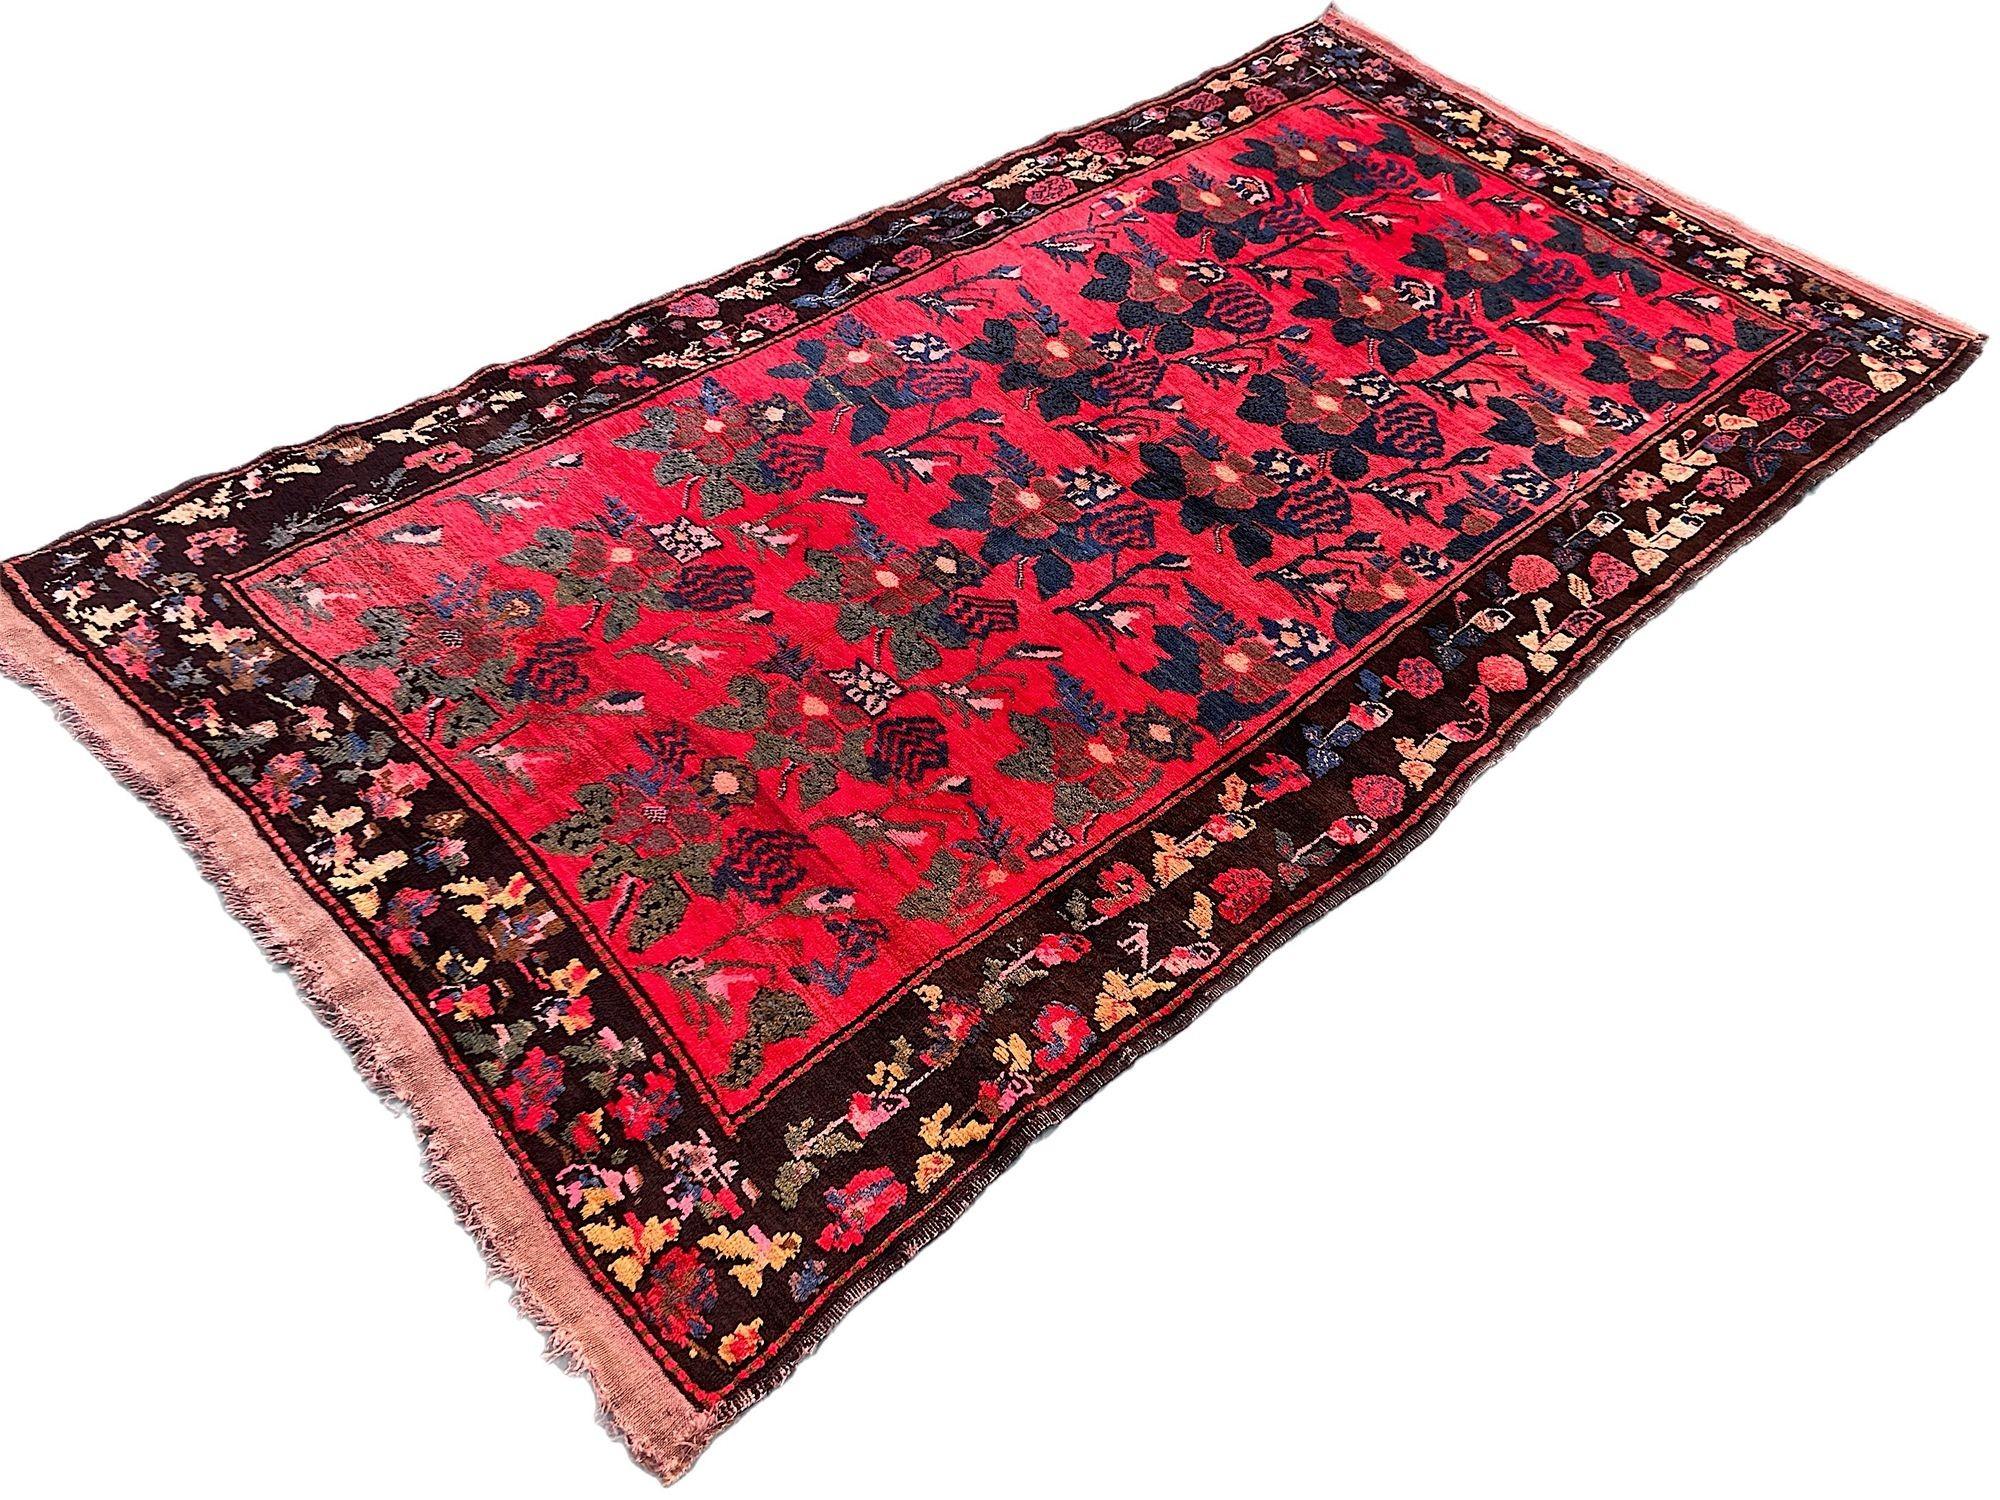 Antique Caucasian Karabagh Rug 2.40m x 1.37m In Good Condition For Sale In St. Albans, GB